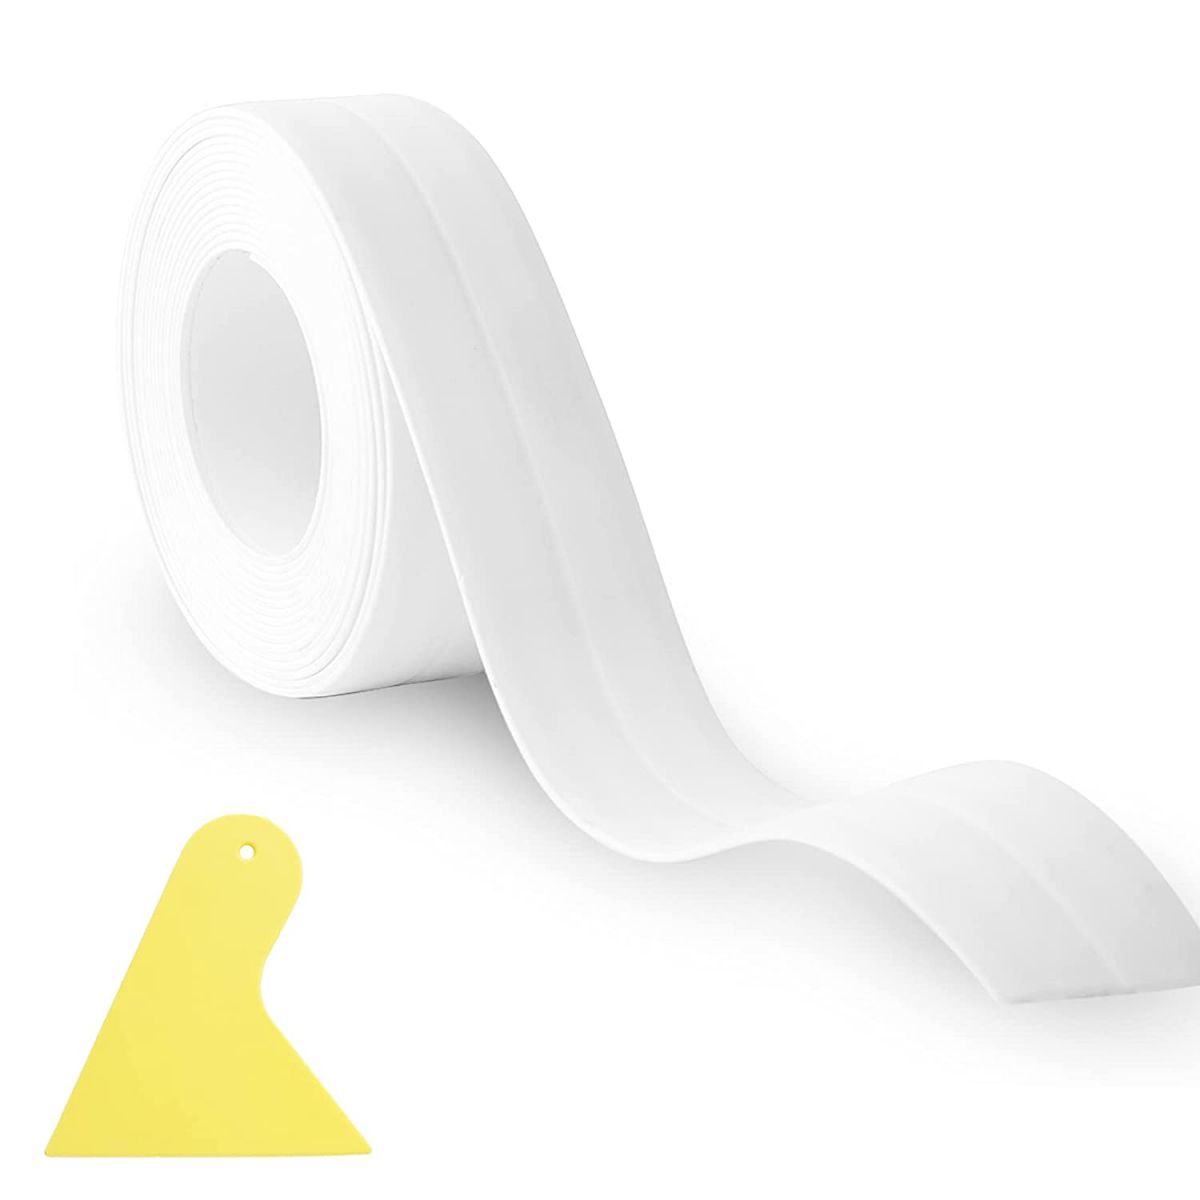 Self Adhesive Waterproof Tape Sealing Tape with Installation Tool (White, 320cm x 2.2cm)